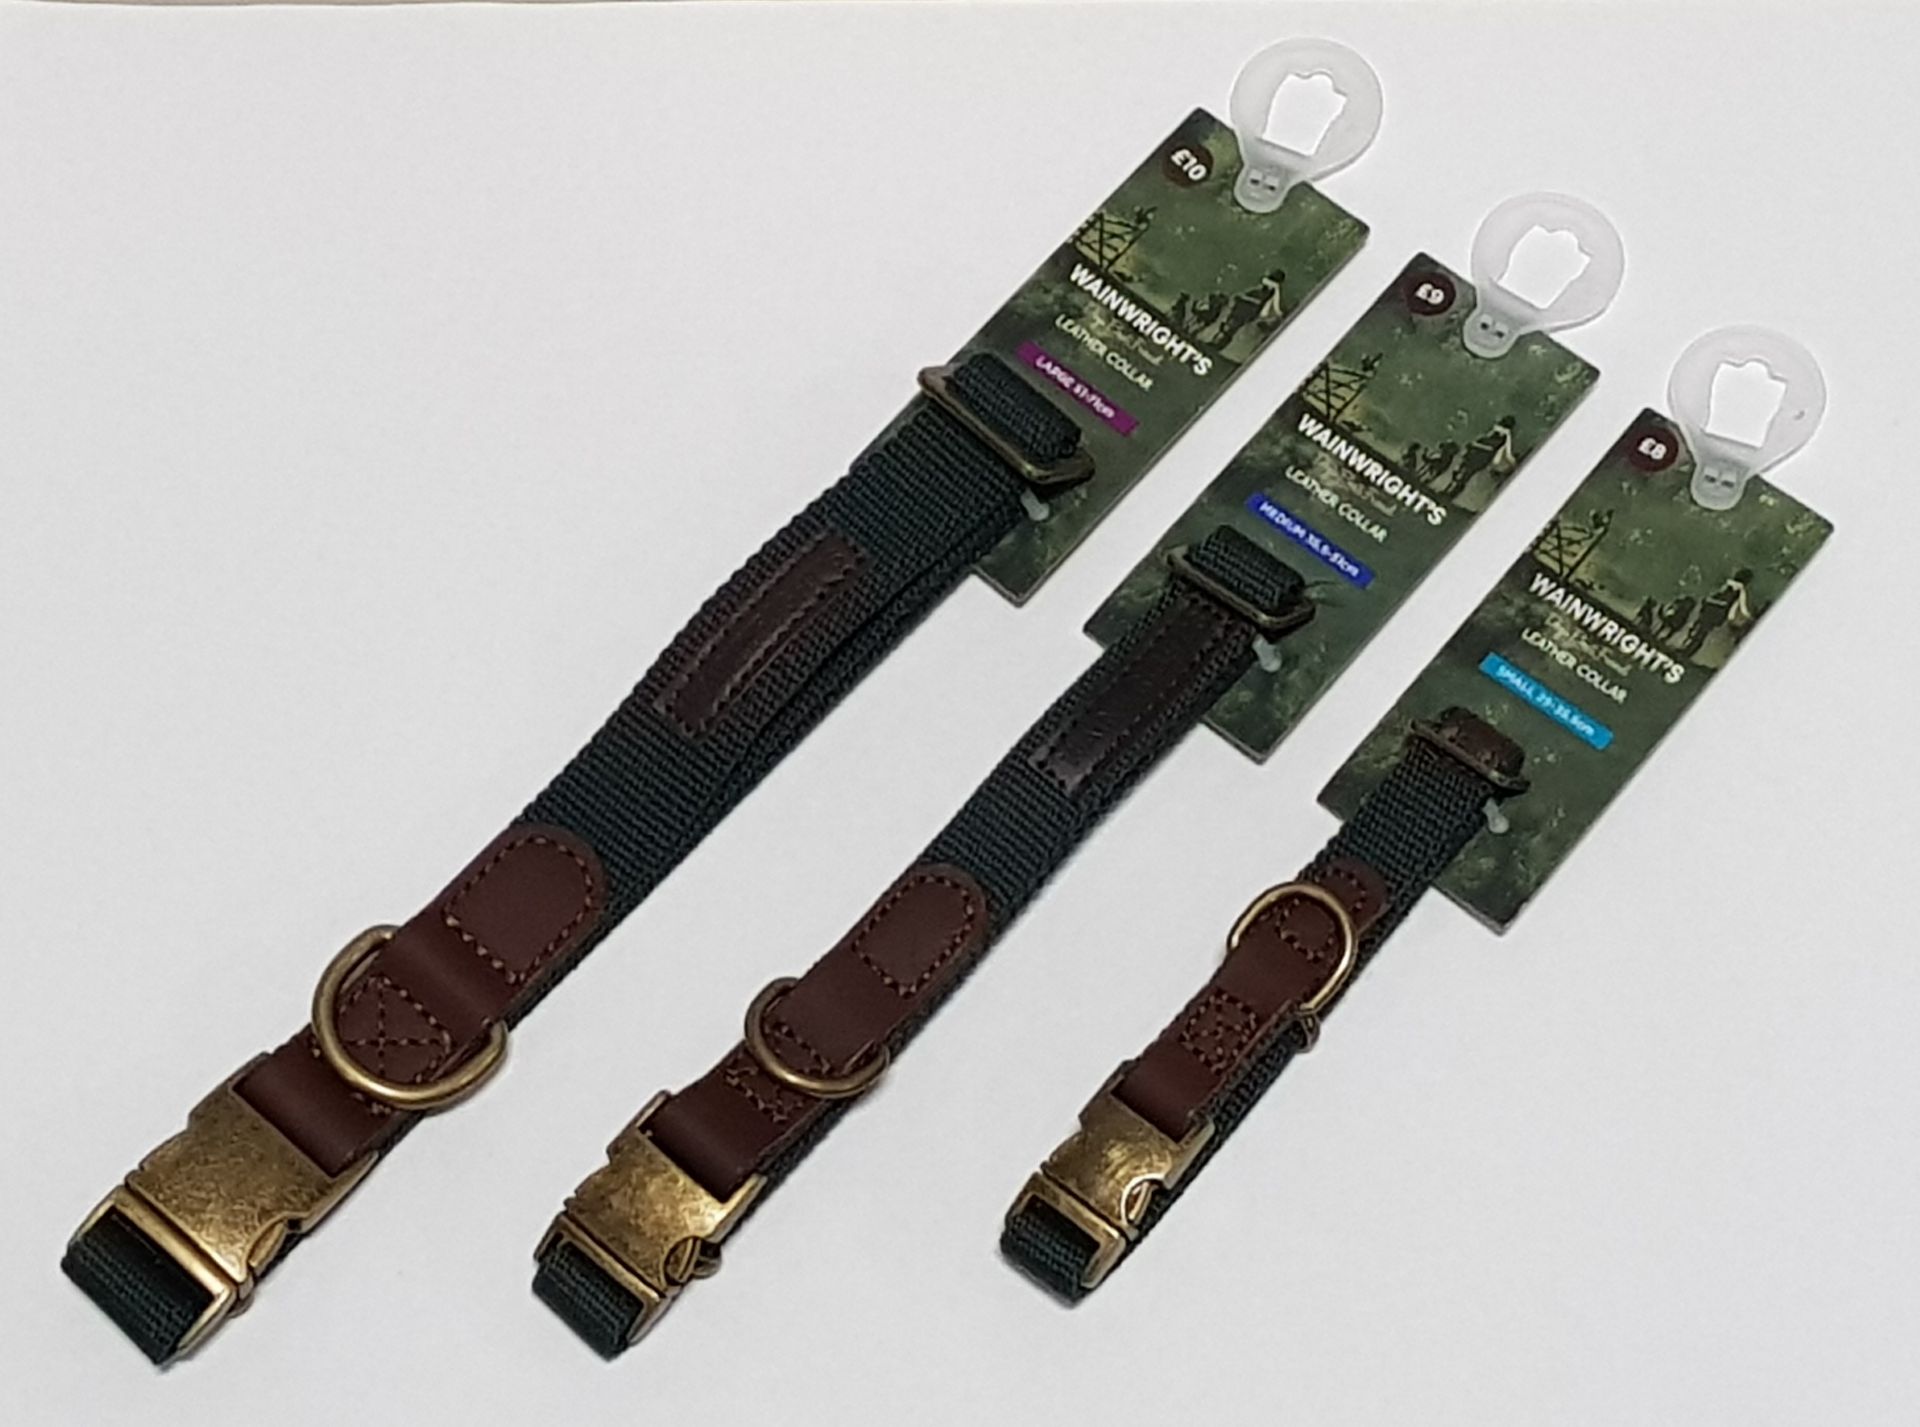 60 X BRAND NEW WAINWRIGHT'S QUALITY LEATHER / CANVAS DOG COLLARS IN 3 ASSORTED SIZES - 20 X LARGE